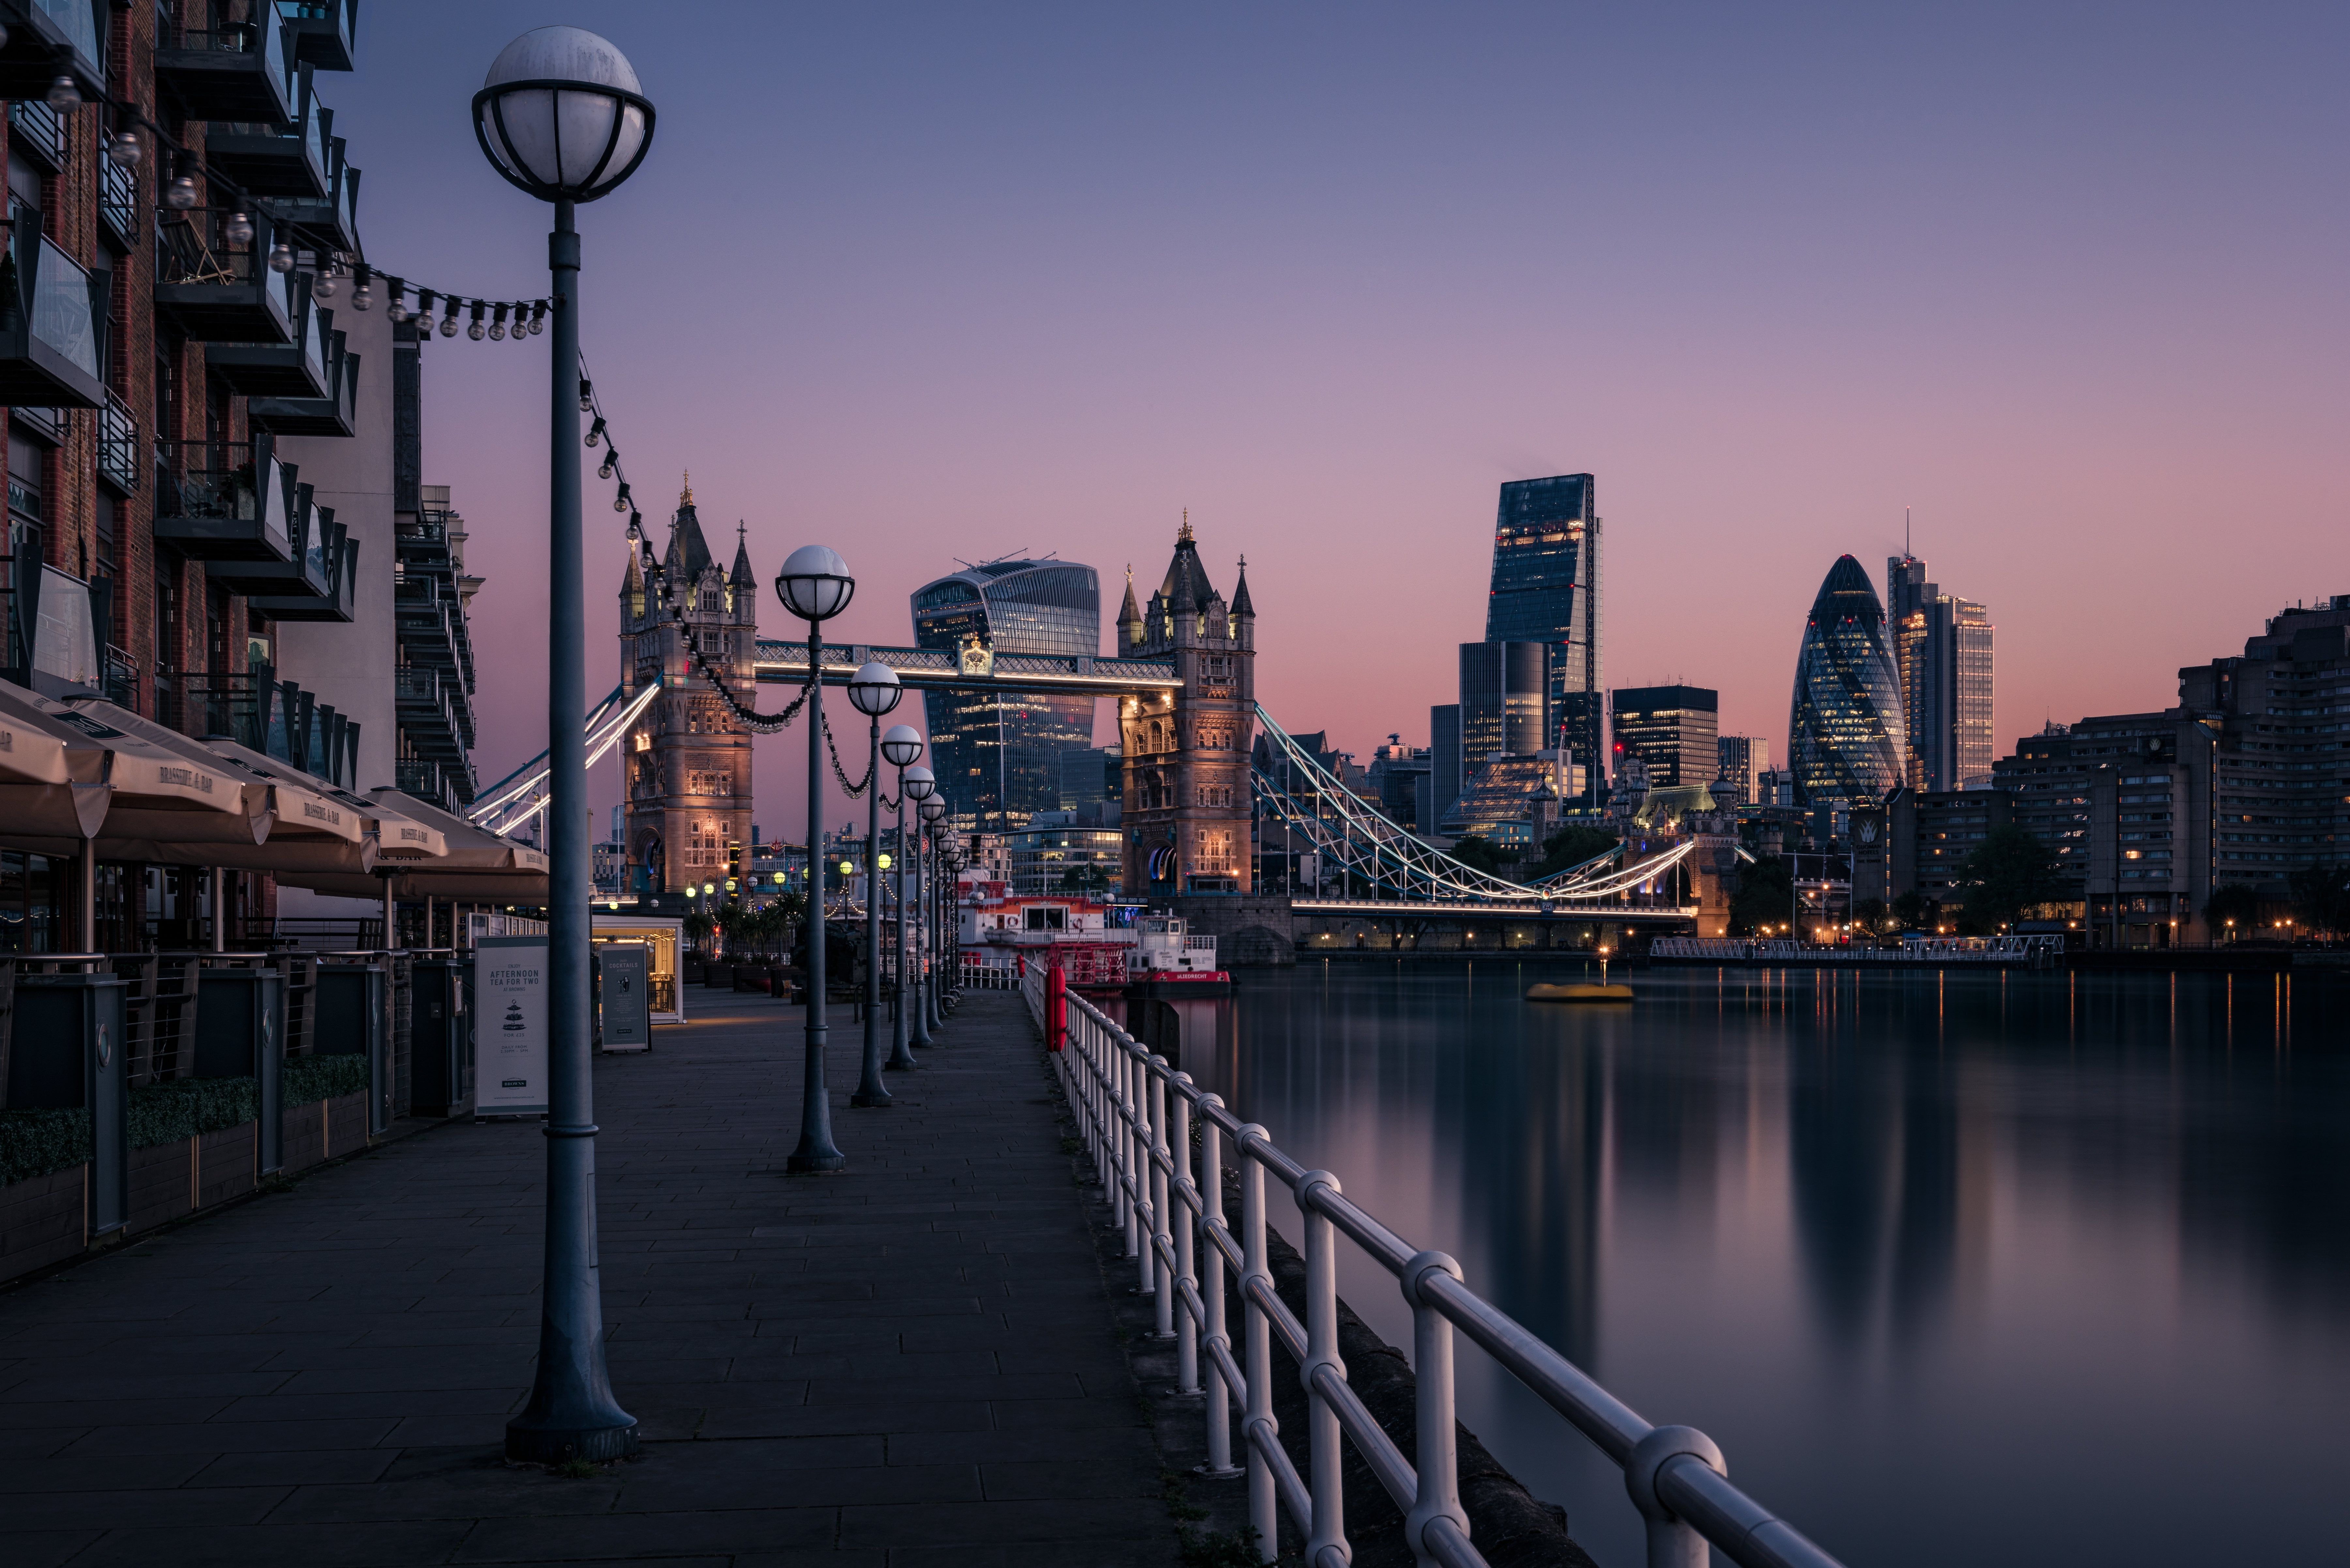 Early morning in London [7203x4807]